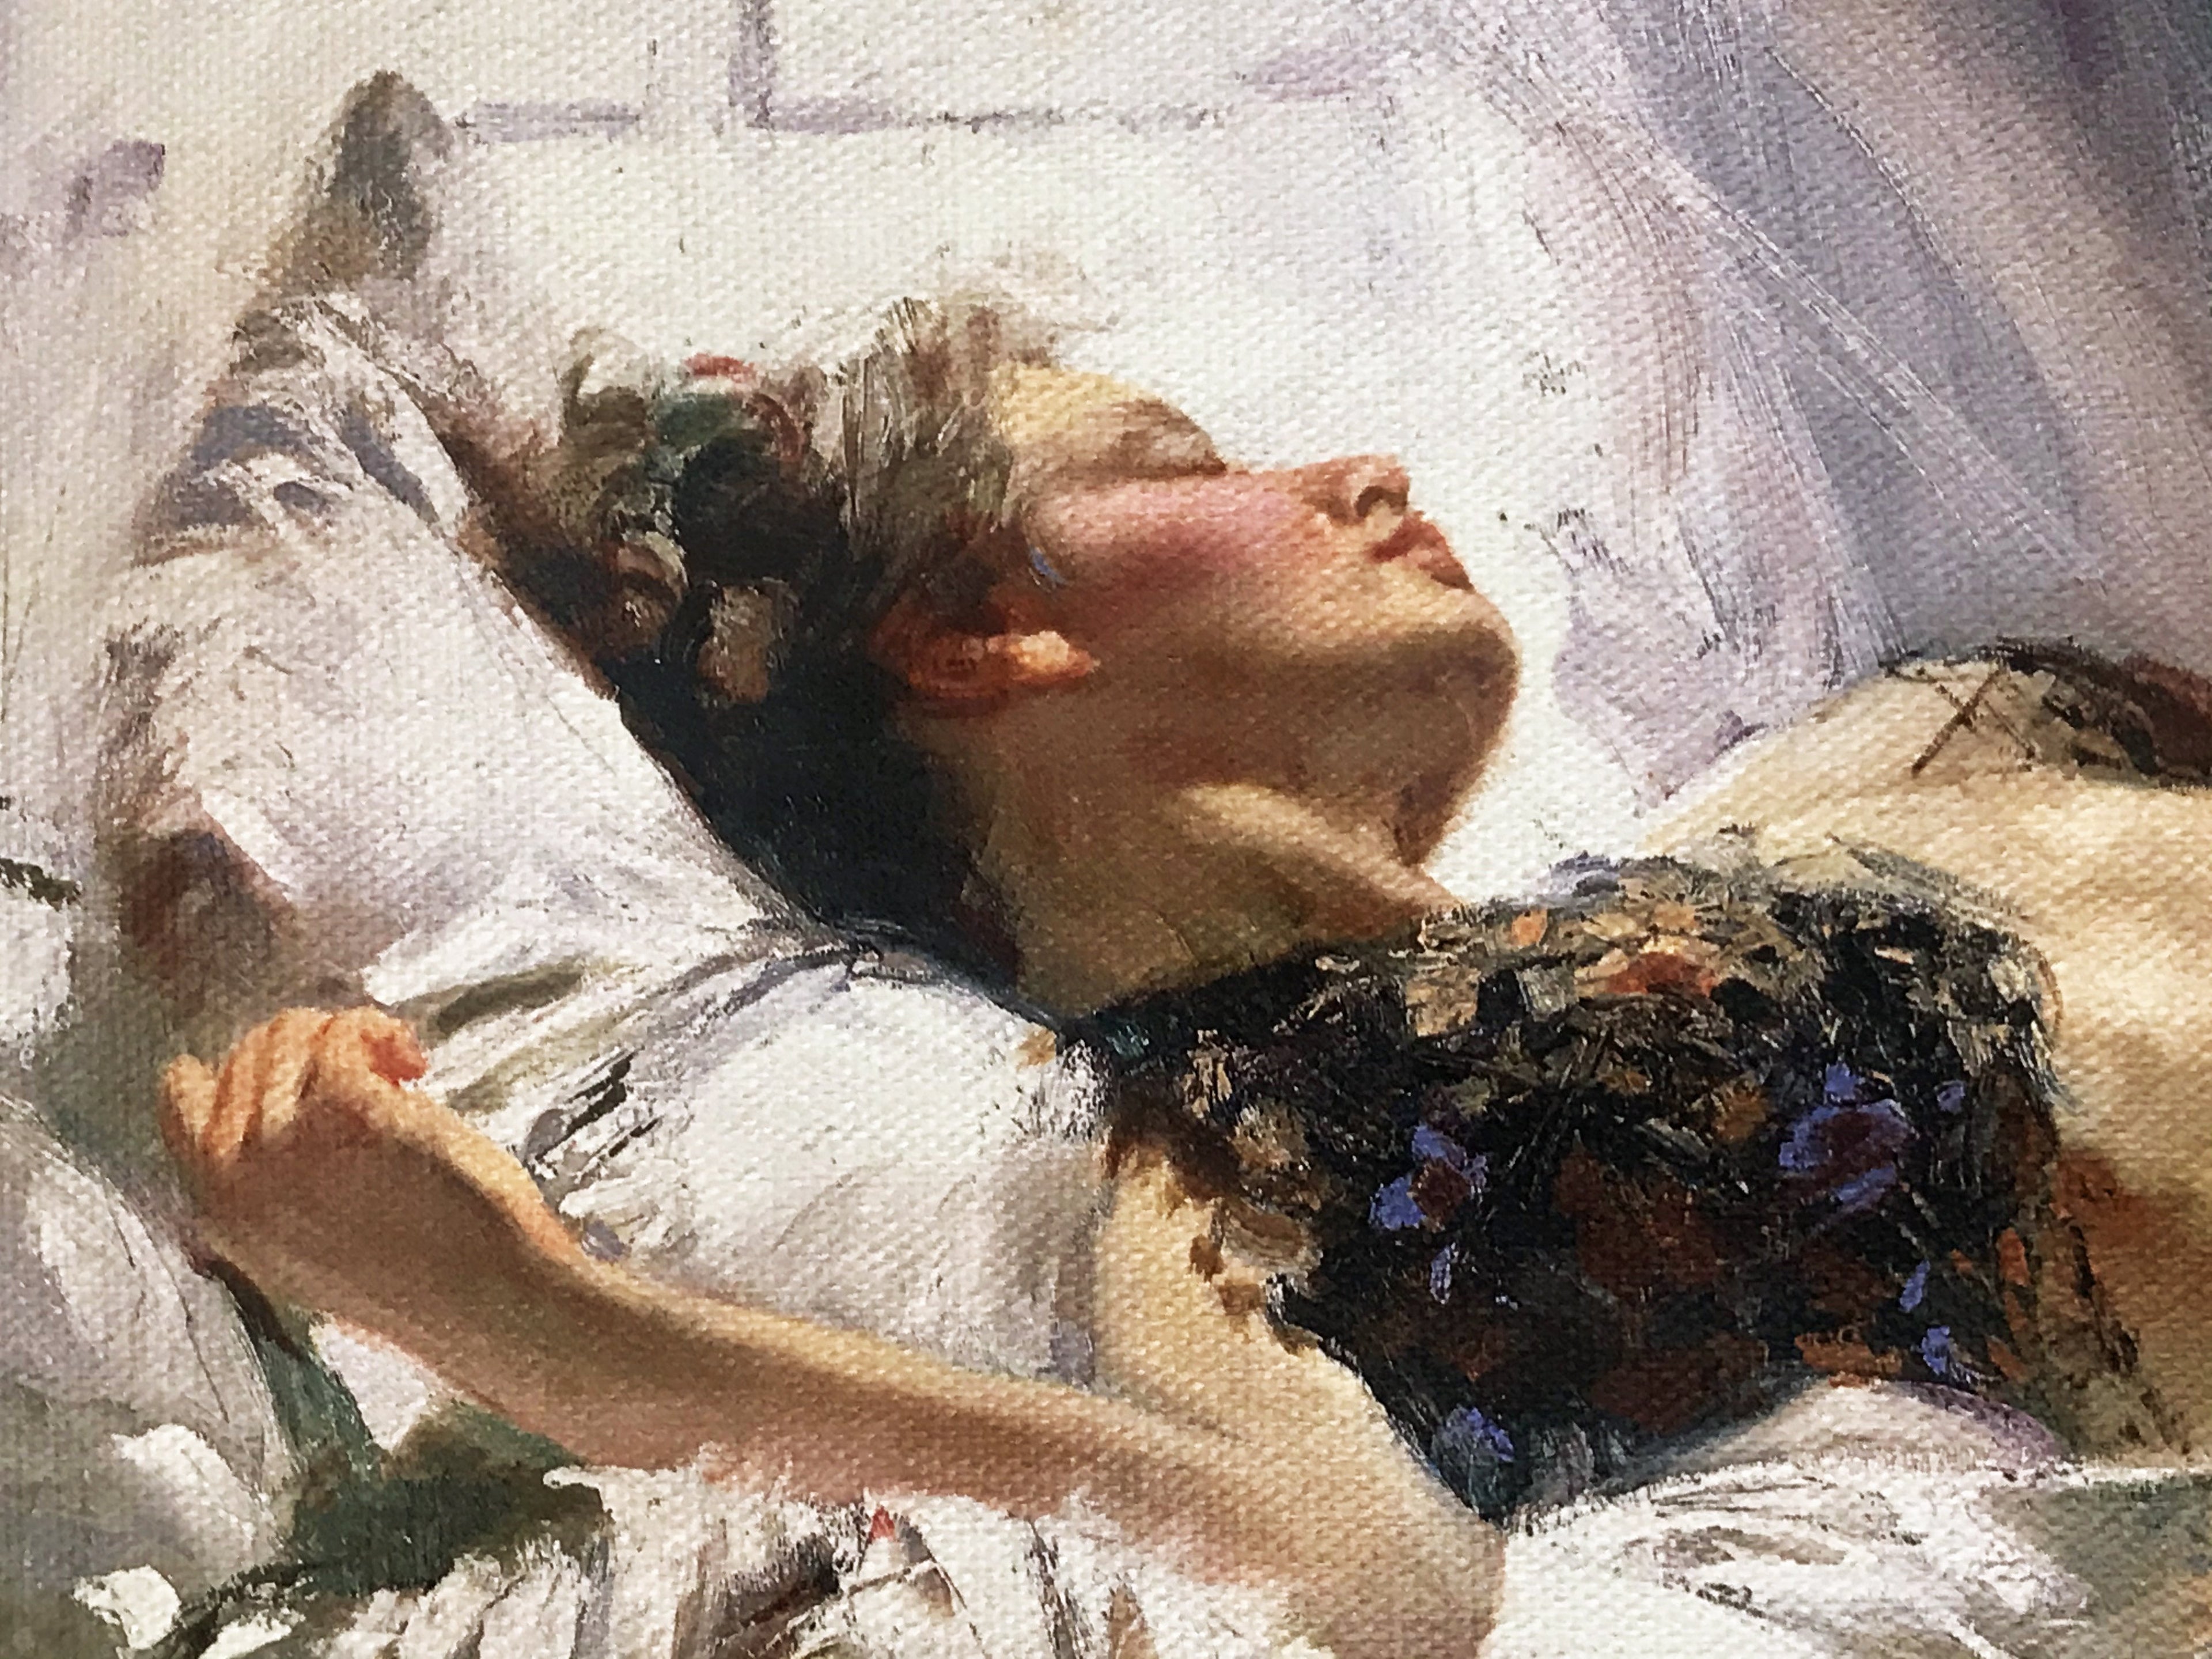 Morning Dreams Pino Daeni Canvas Giclée Print Artist Hand Signed and Numbered